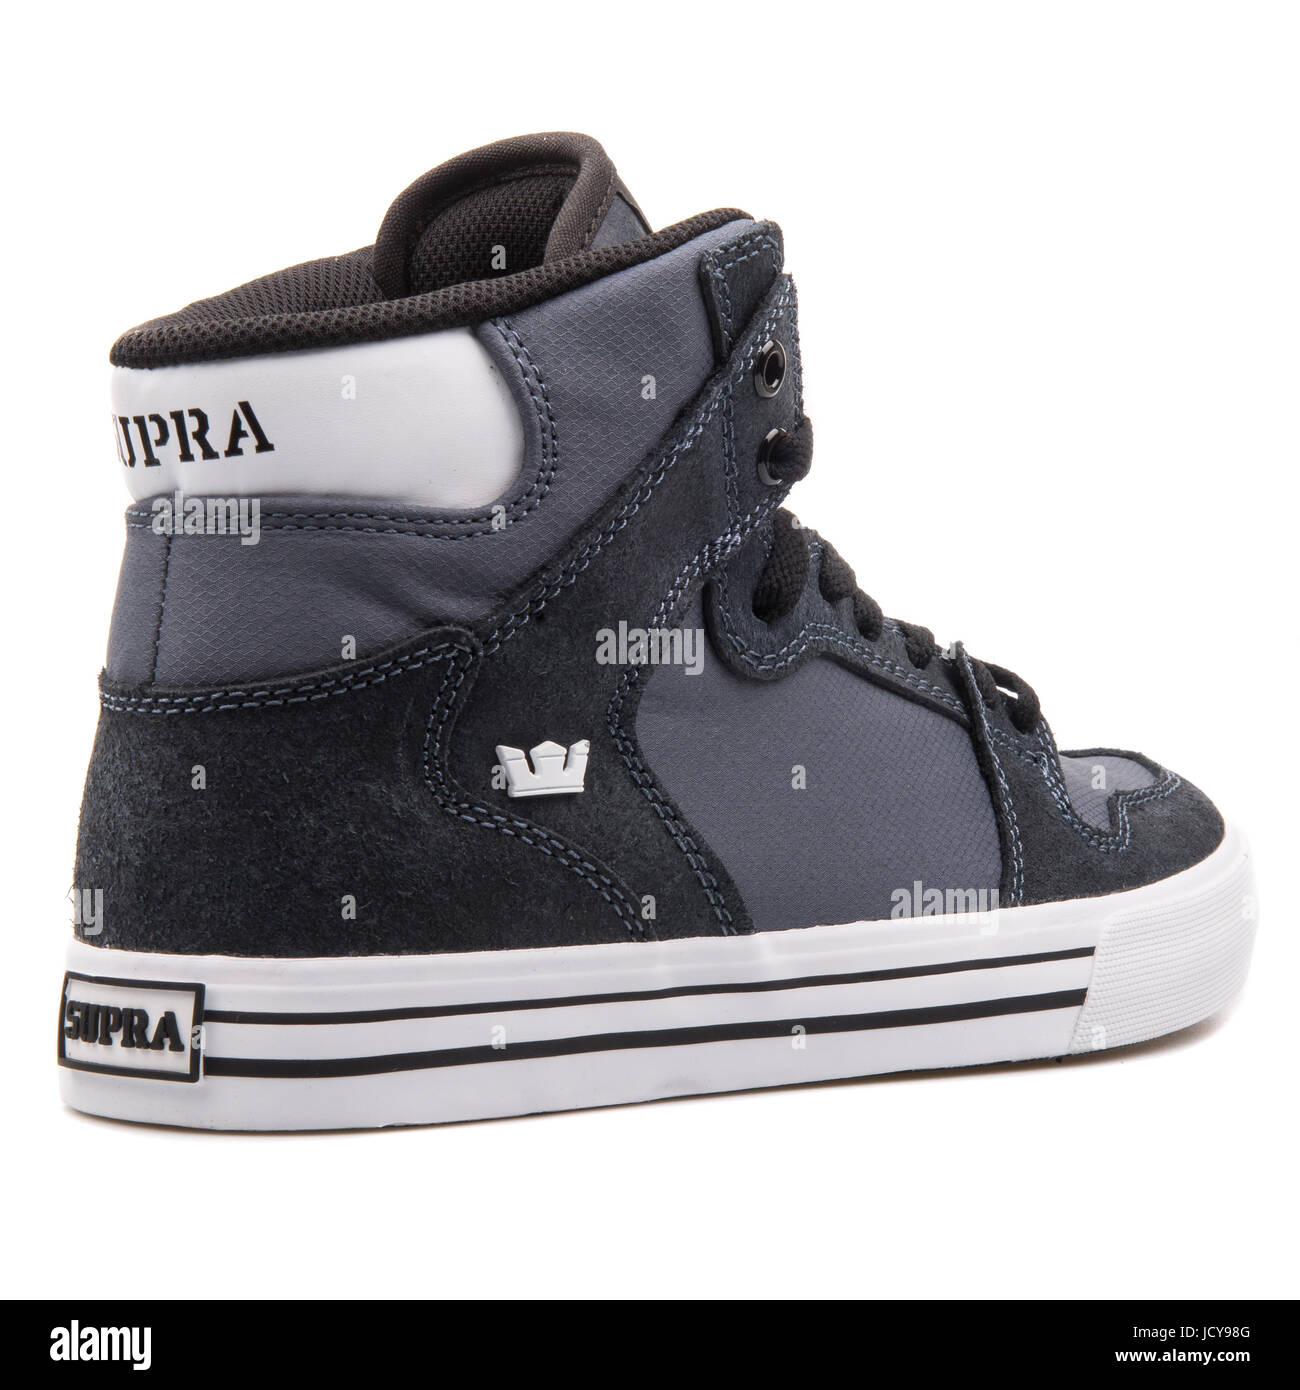 Supra Vaider Charcoal White Men's Sportive Shoes - S28271 Stock Photo -  Alamy